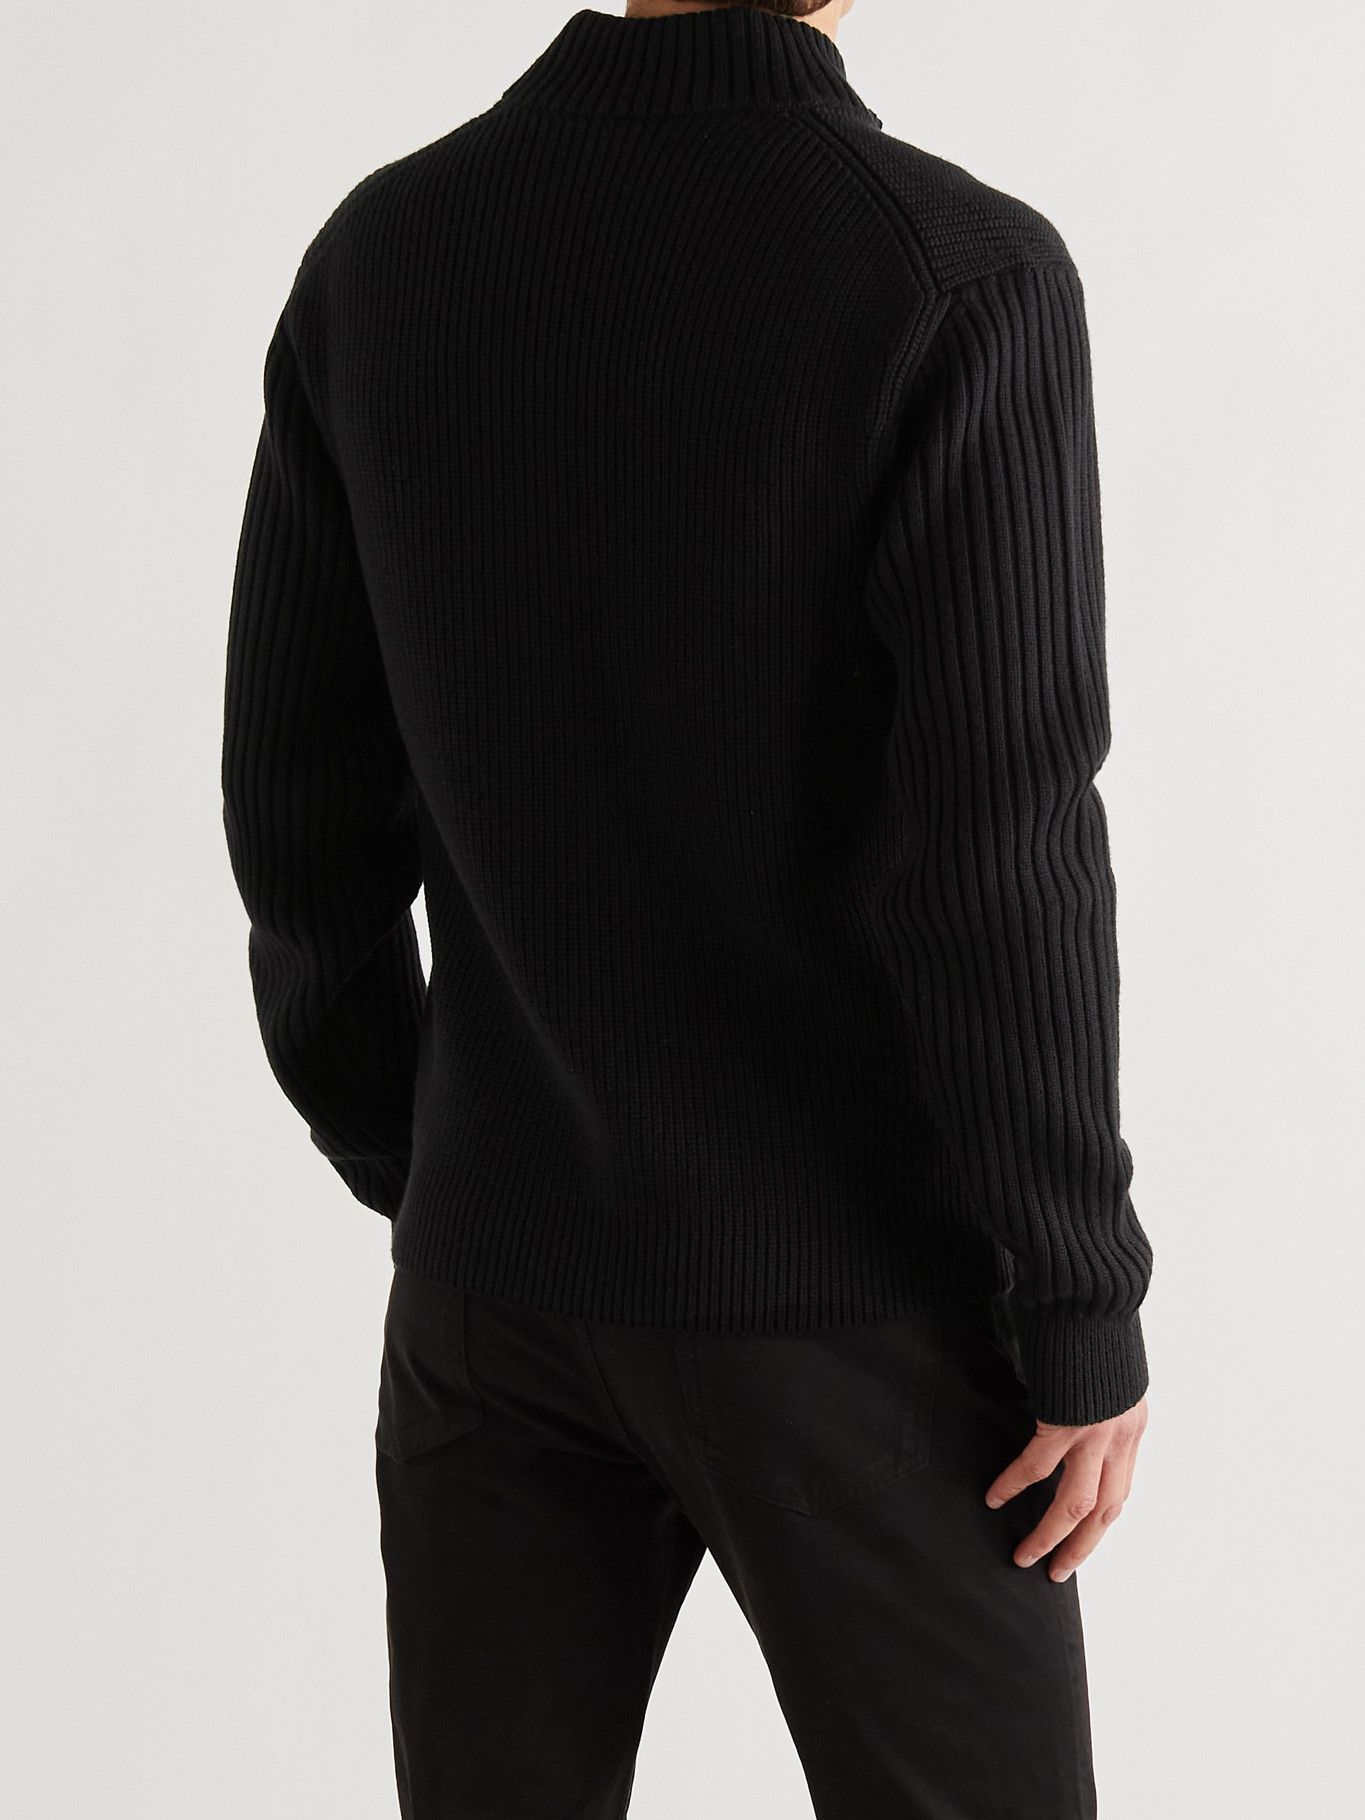 DUNHILL - Leather-Trimmed Ribbed Wool Half-Zip Sweater - Black Dunhill